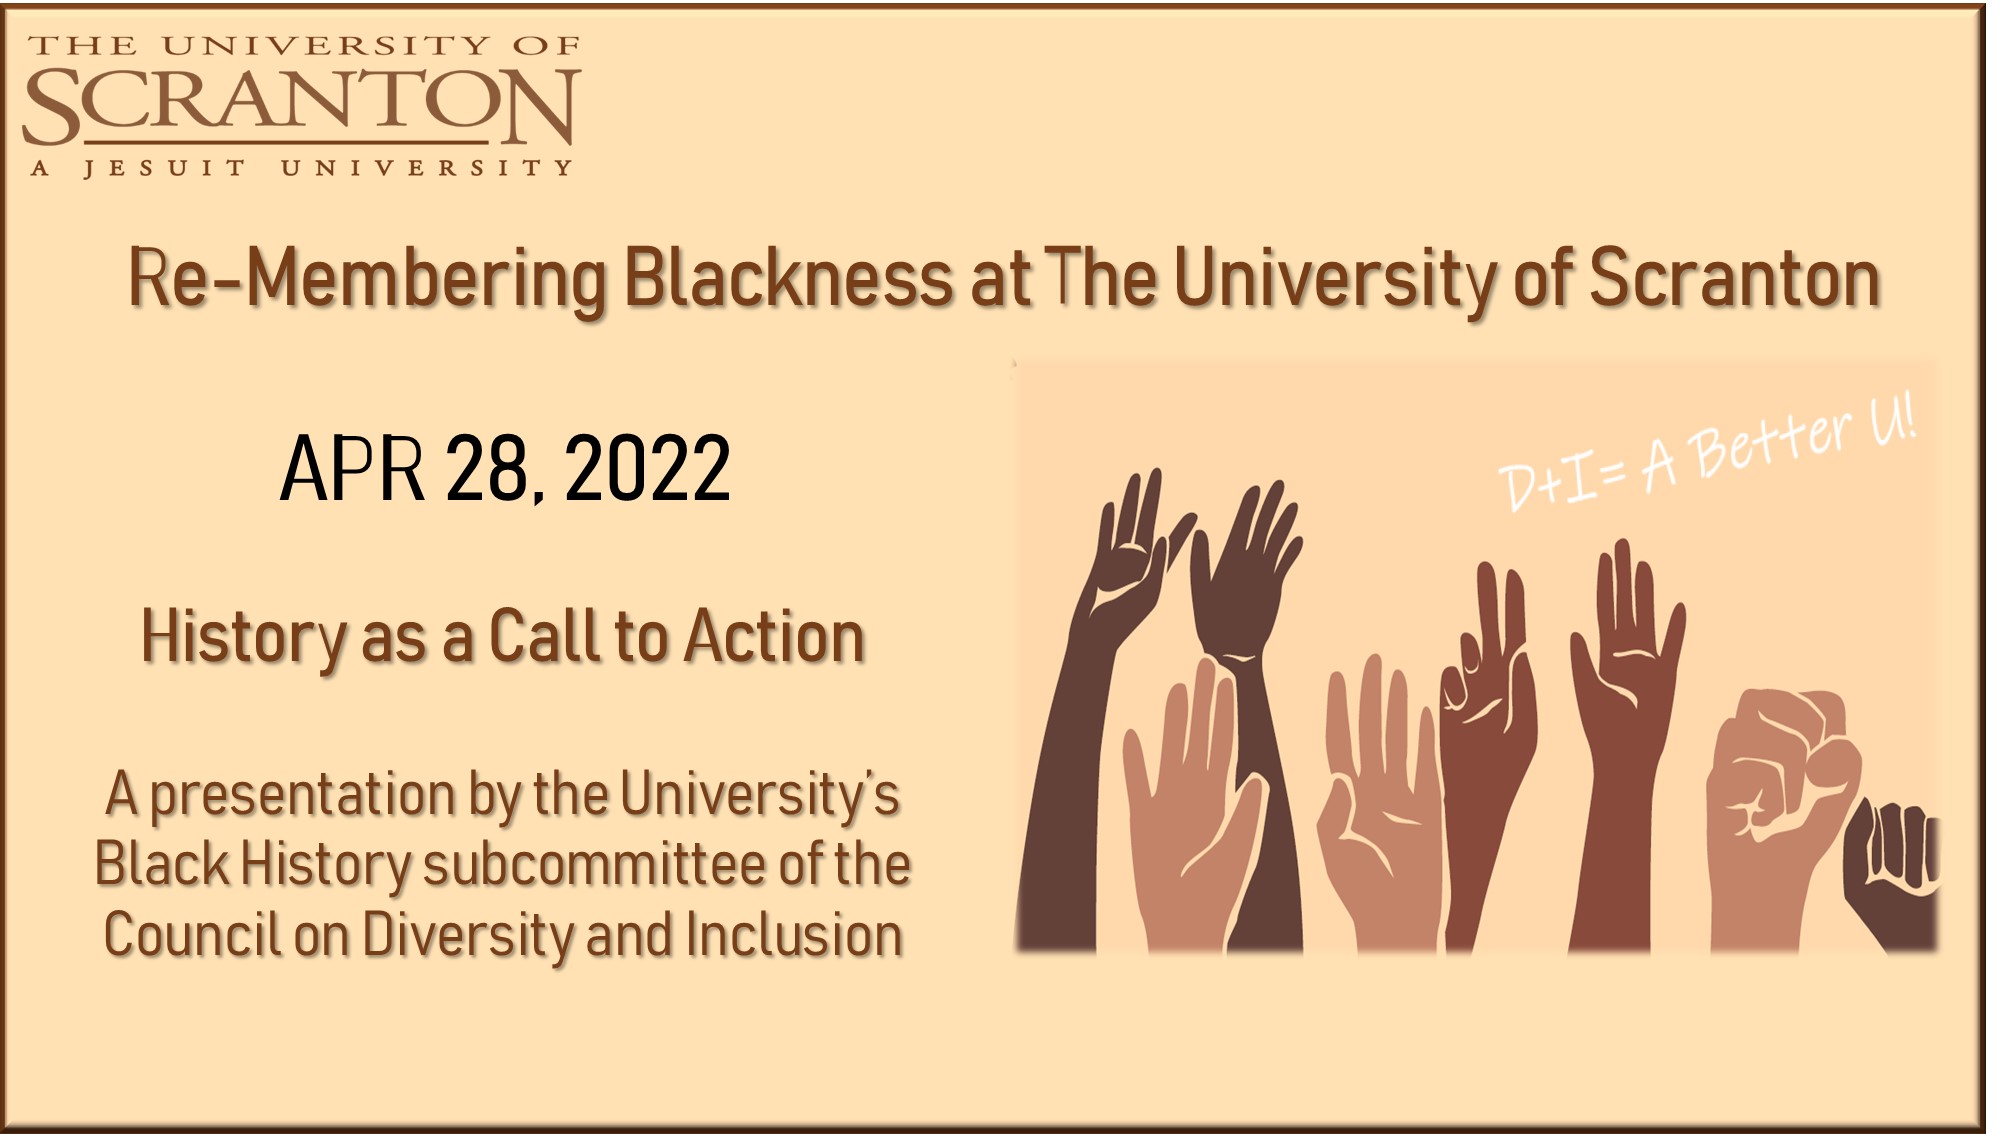 Re-Membering Blackness: History as a Call to Action Impact Banner